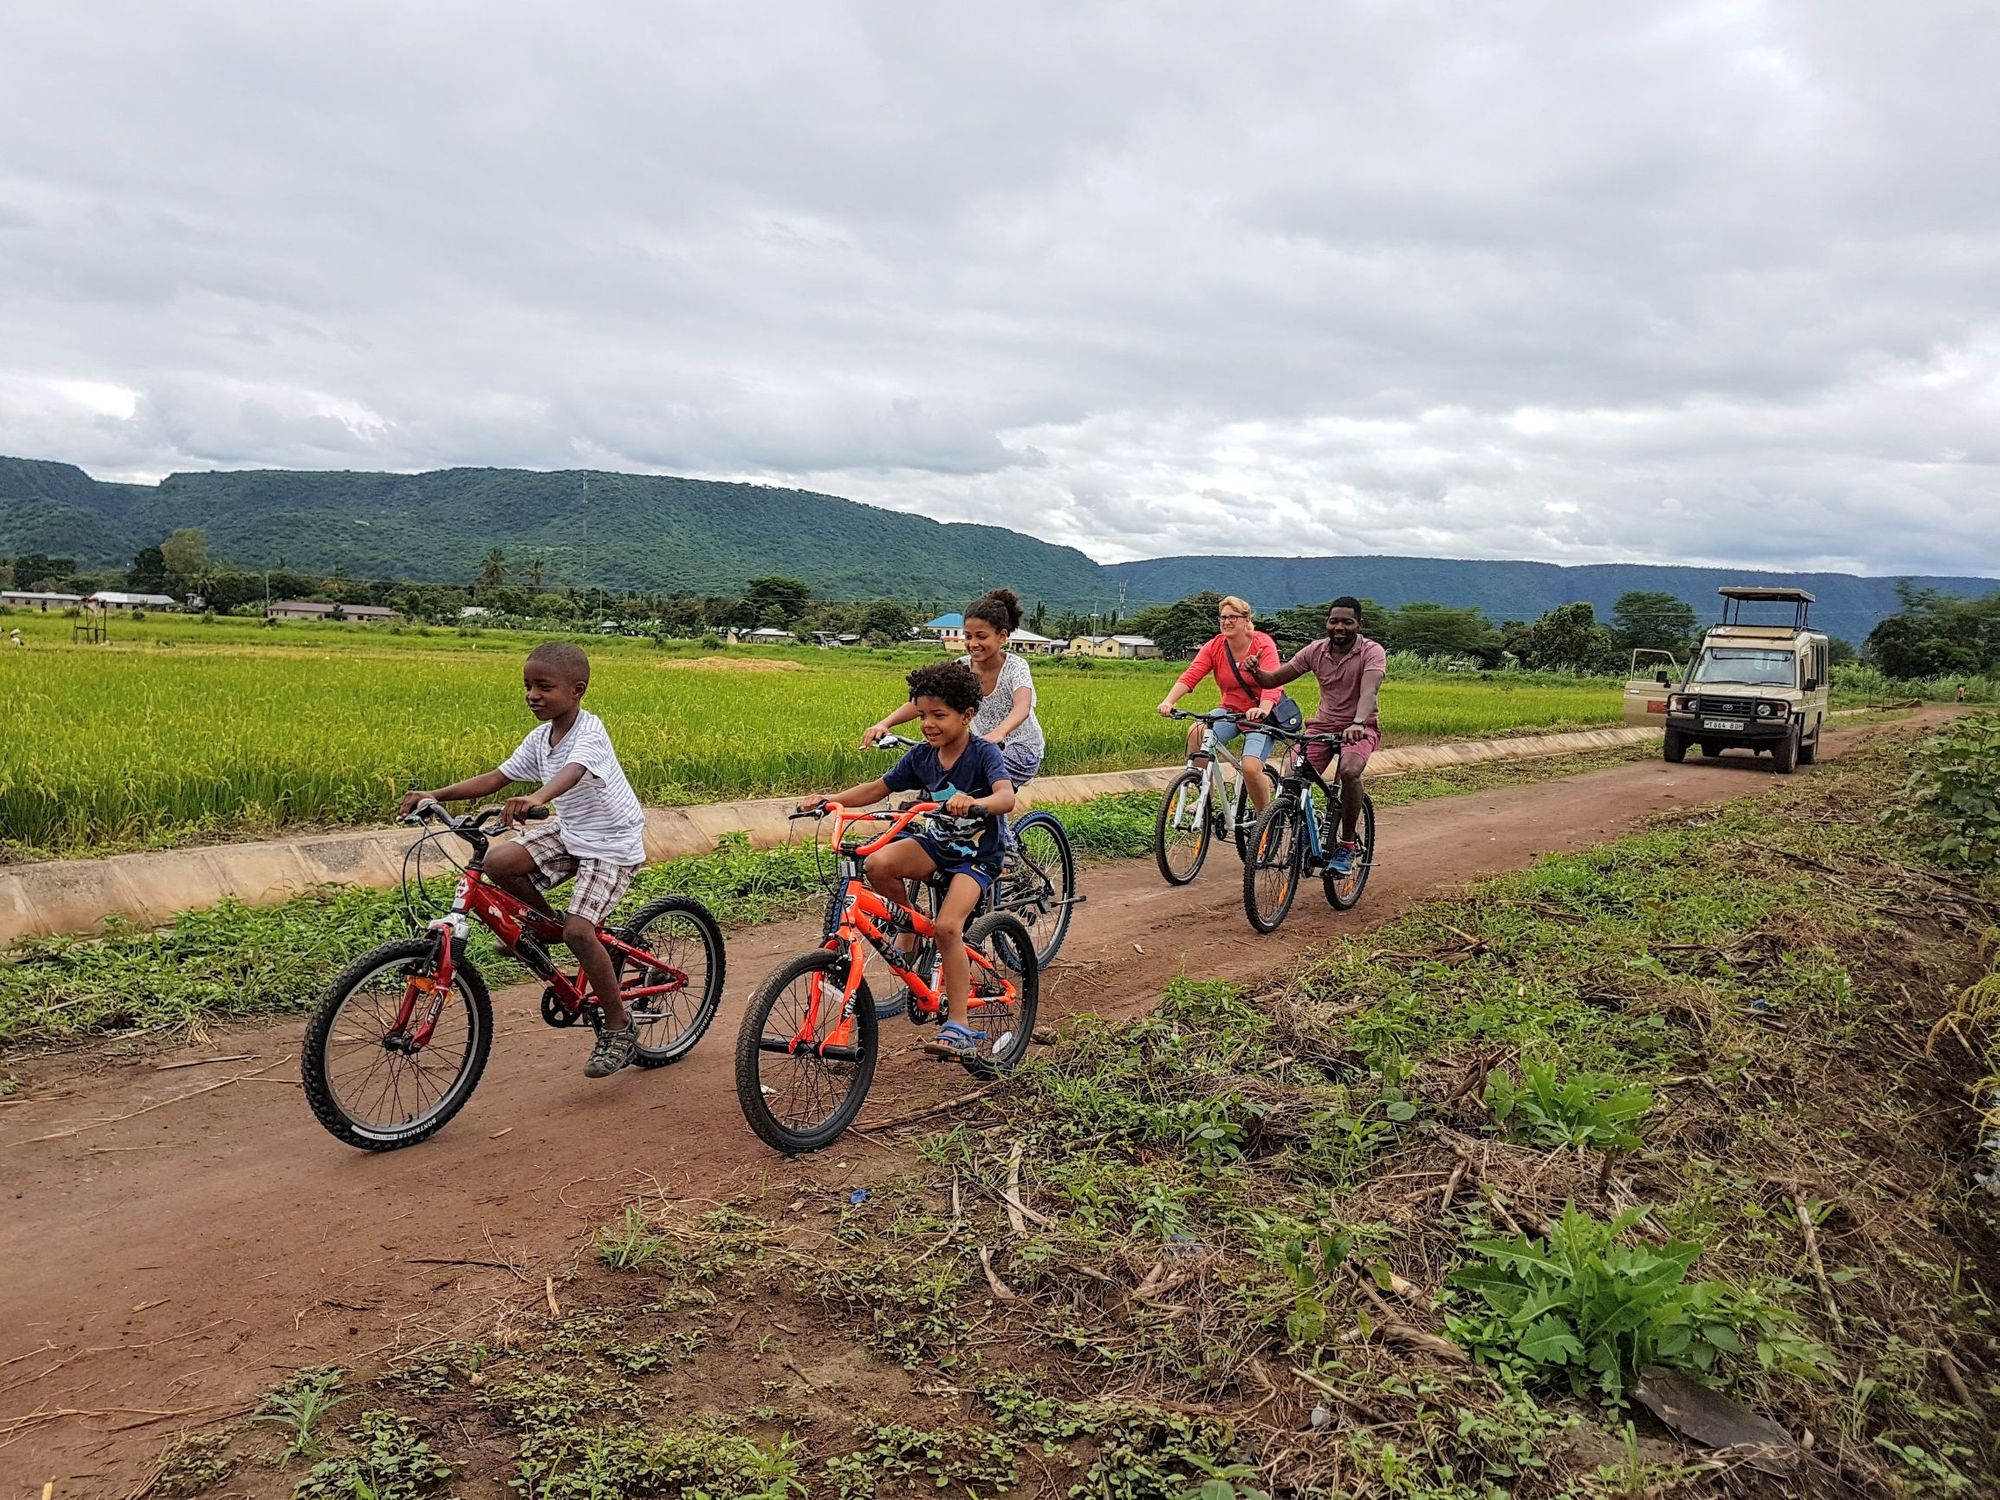 A family going out for a cycle ride in Tanzania.